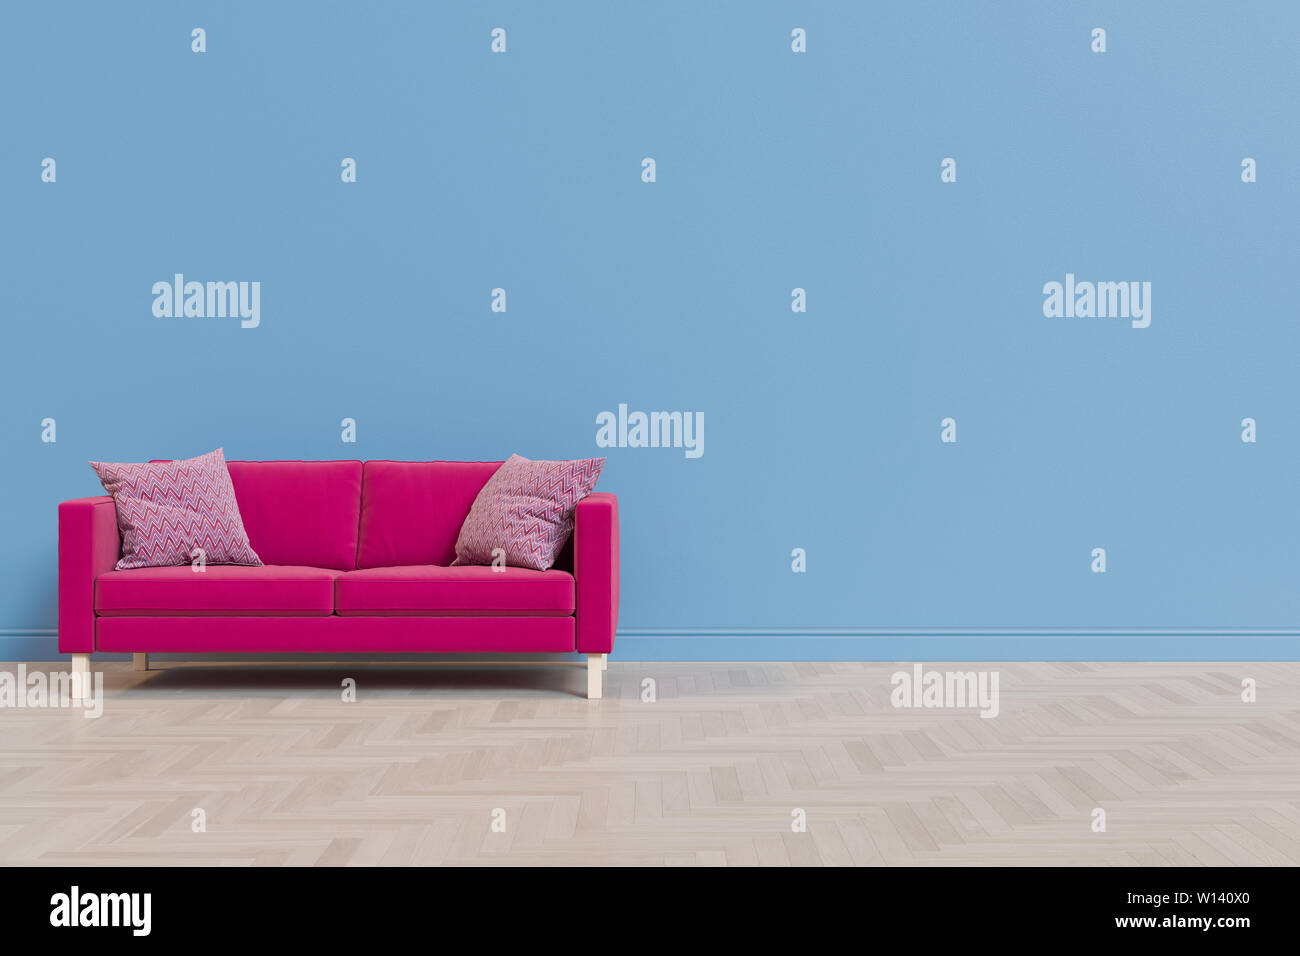 3d illustration of a living room with a fabric sofa against the background of an empty wall and wooden floor. Render for mock up Stock Photo